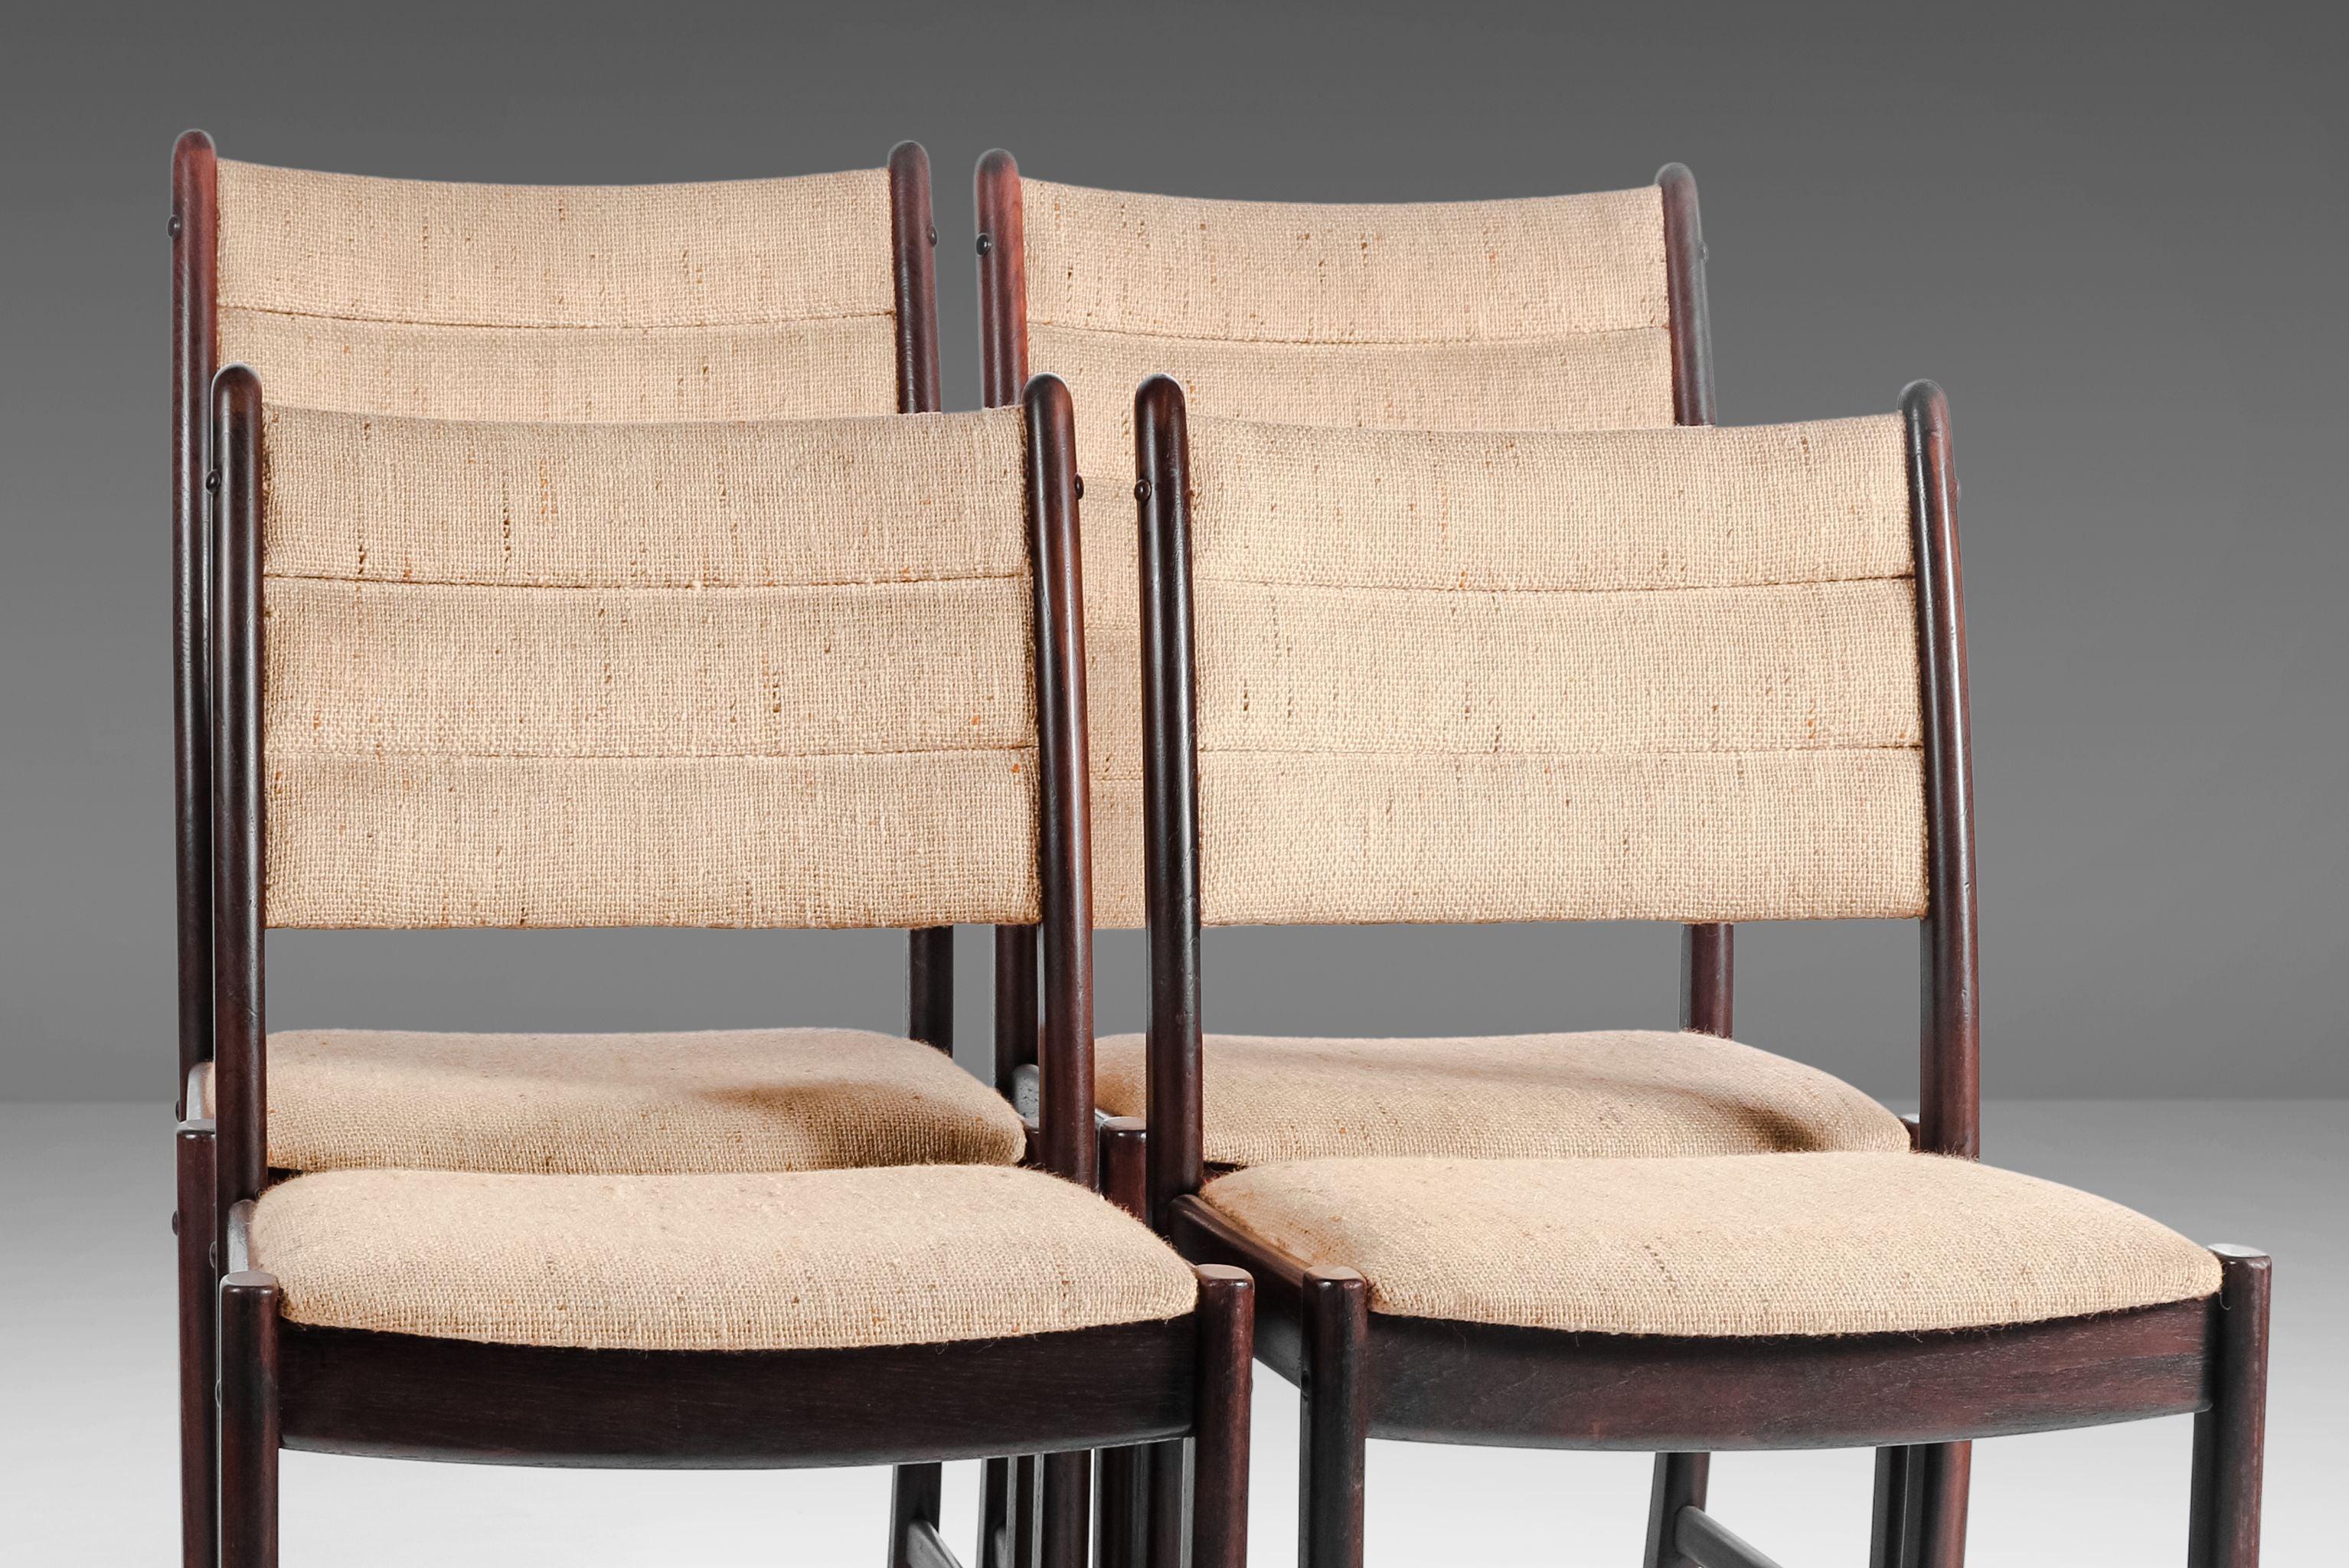 Set of Four (4) Danish Modern Dining Chairs in Afromosia & Original Fabric, 1970 For Sale 9